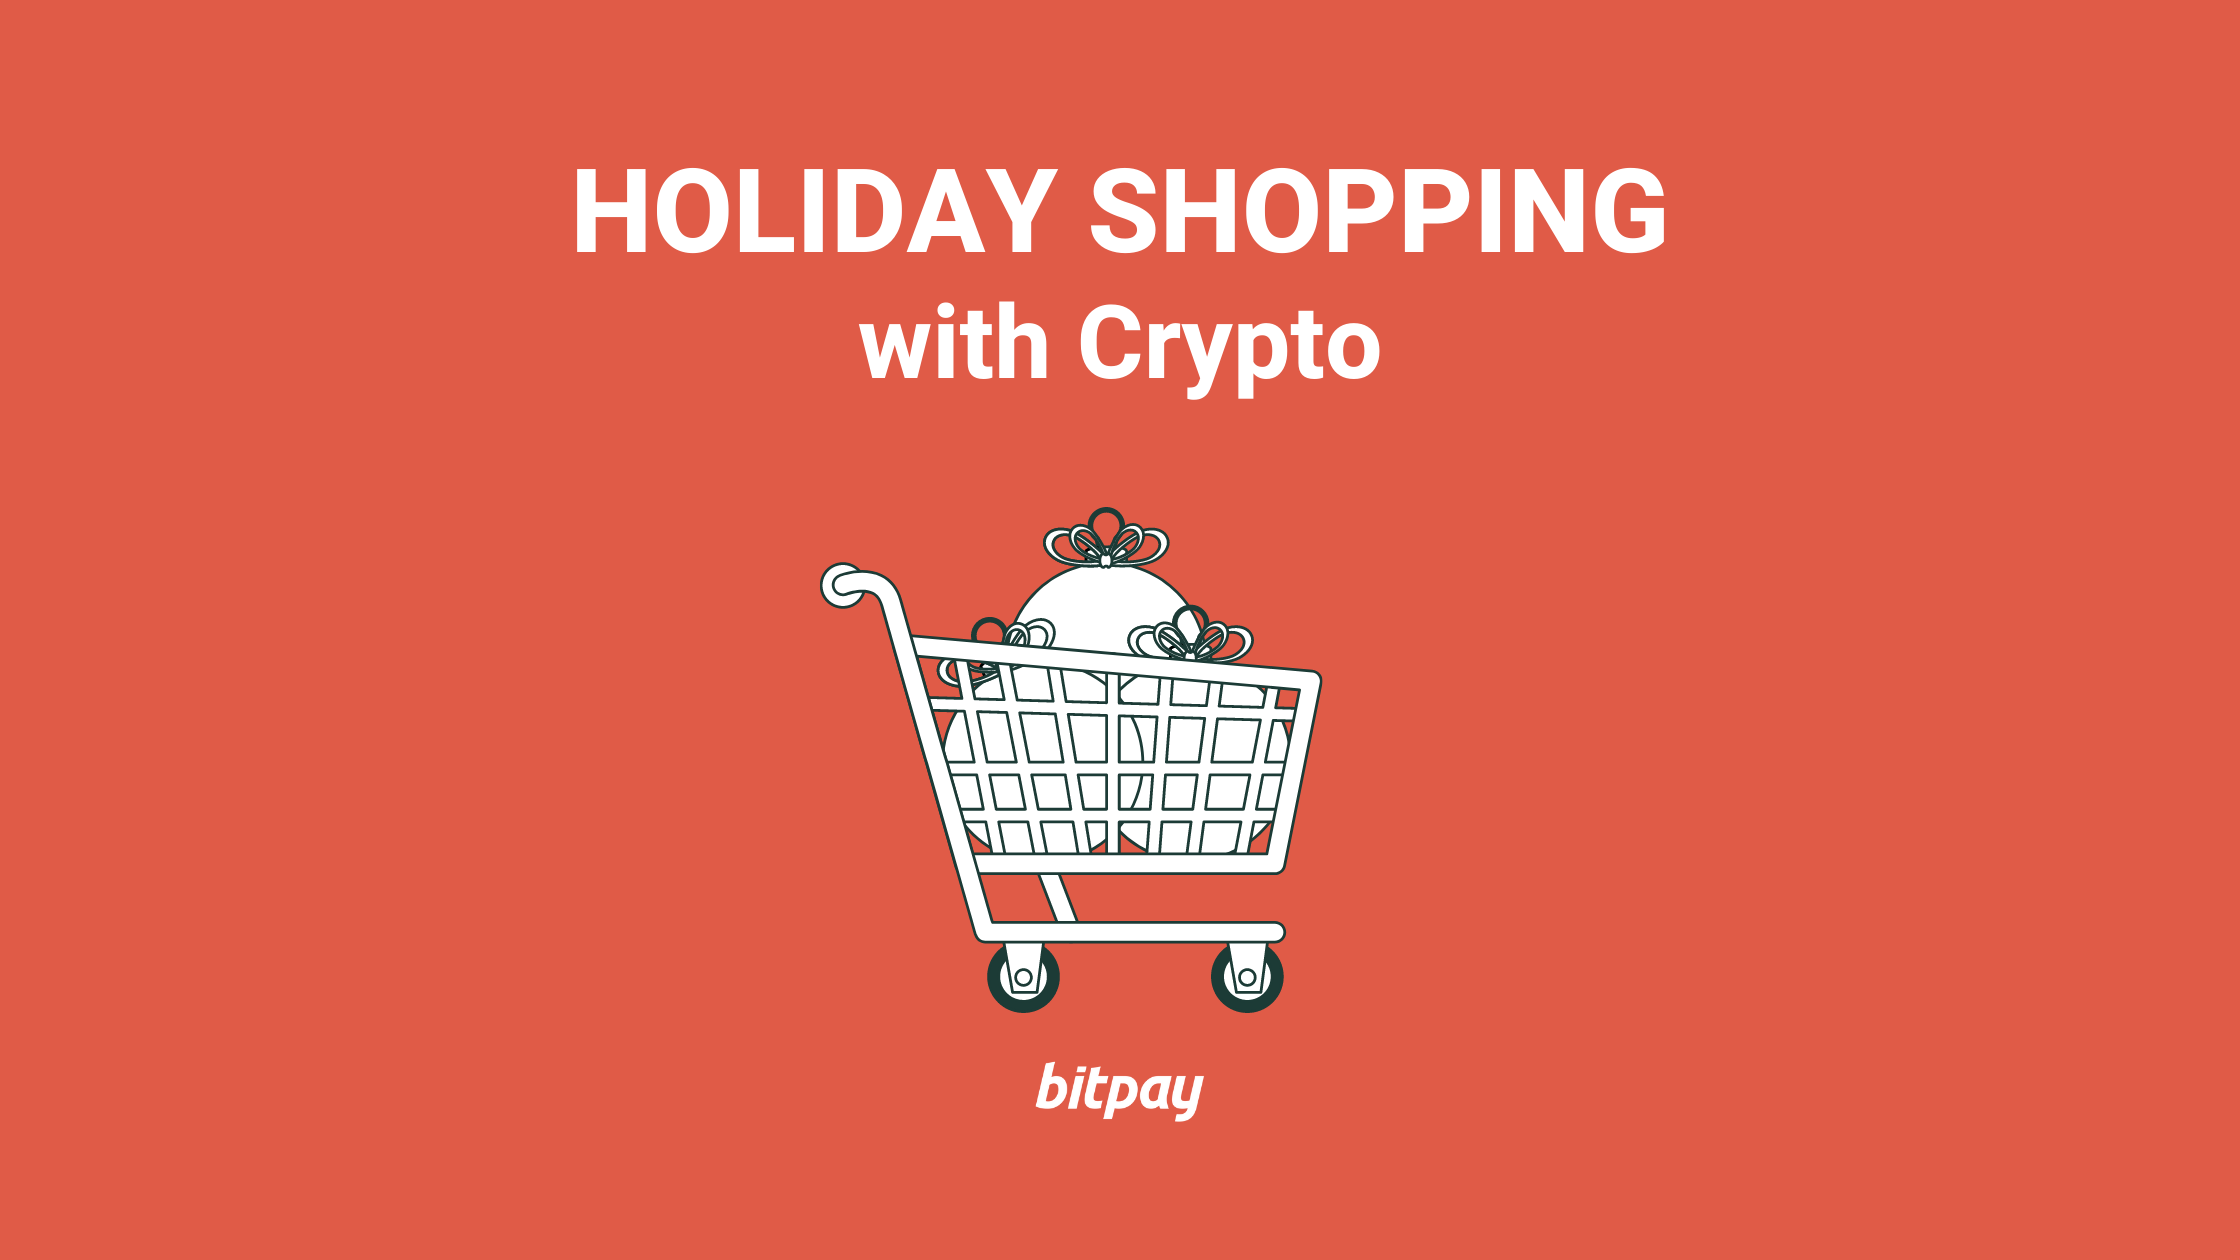 Do You Holiday Shopping with Crypto This Year